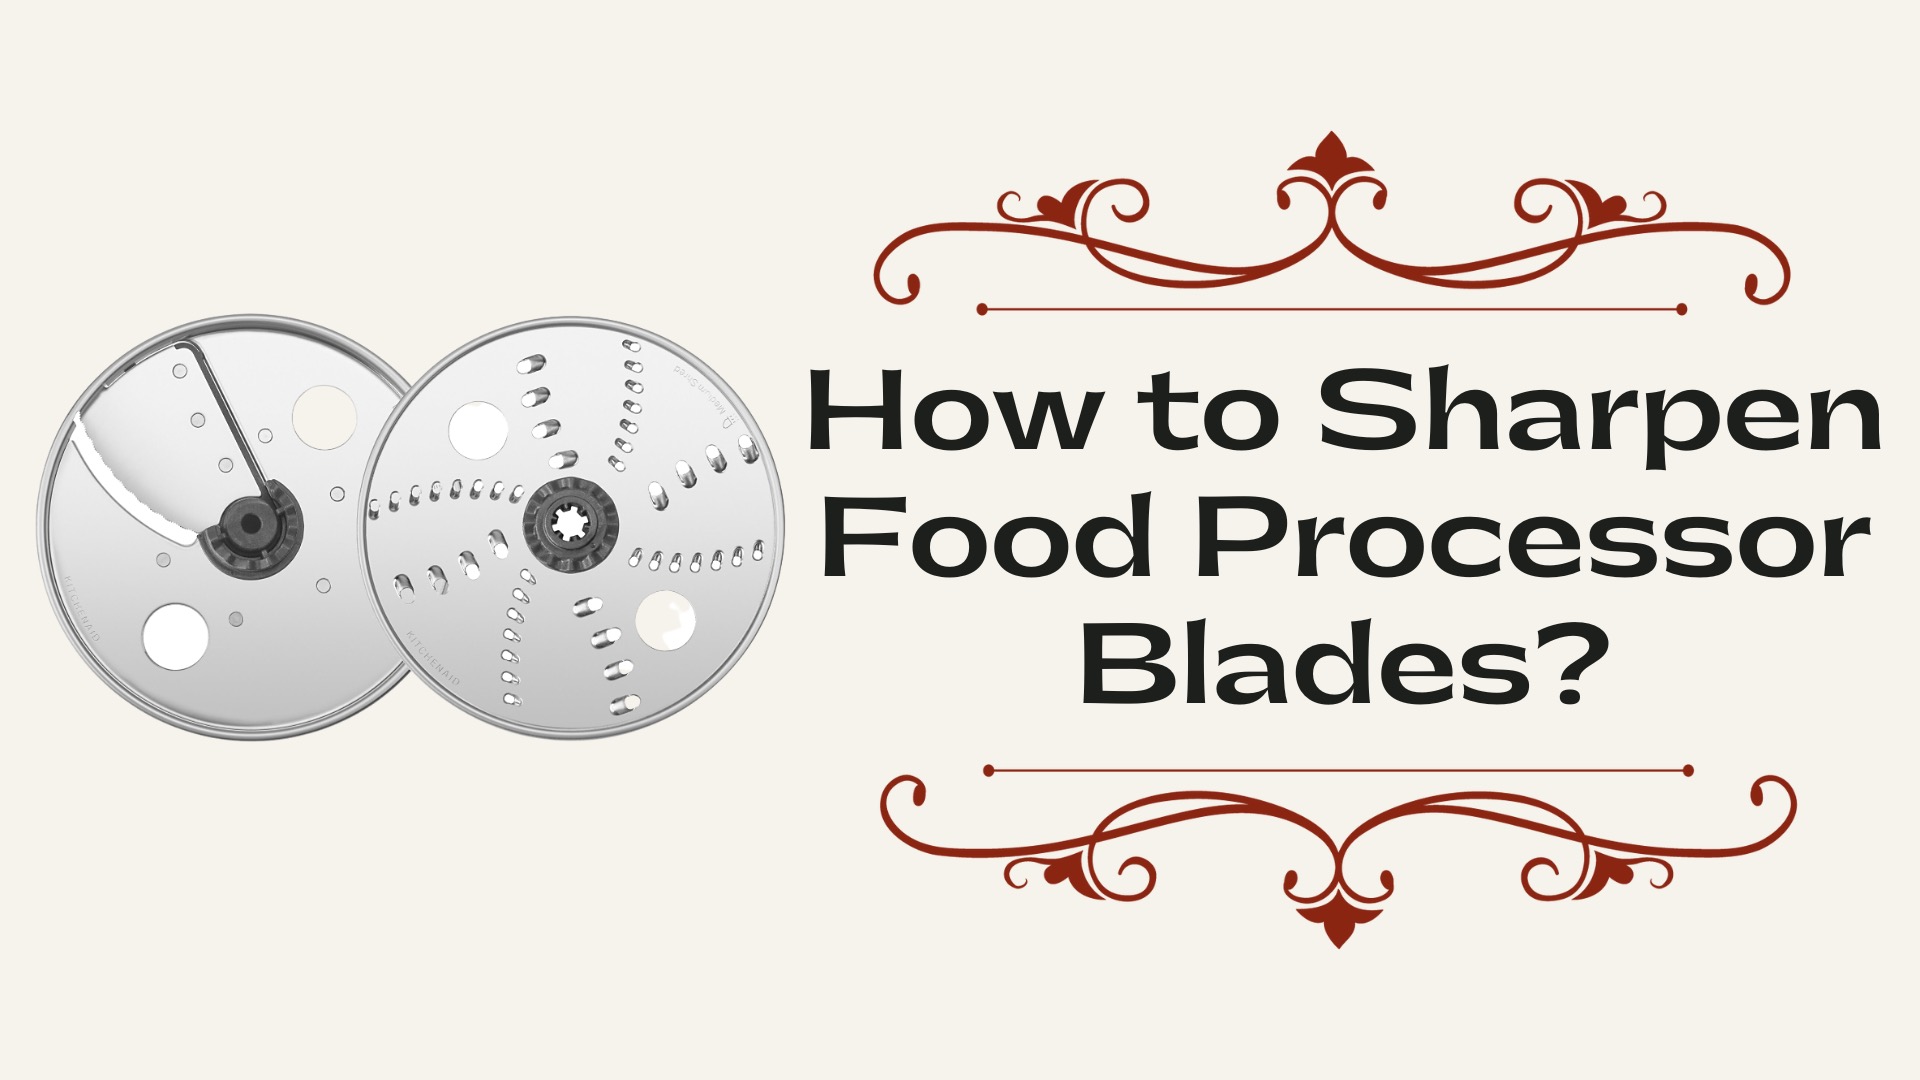 How to Sharpen Food Processor Blades